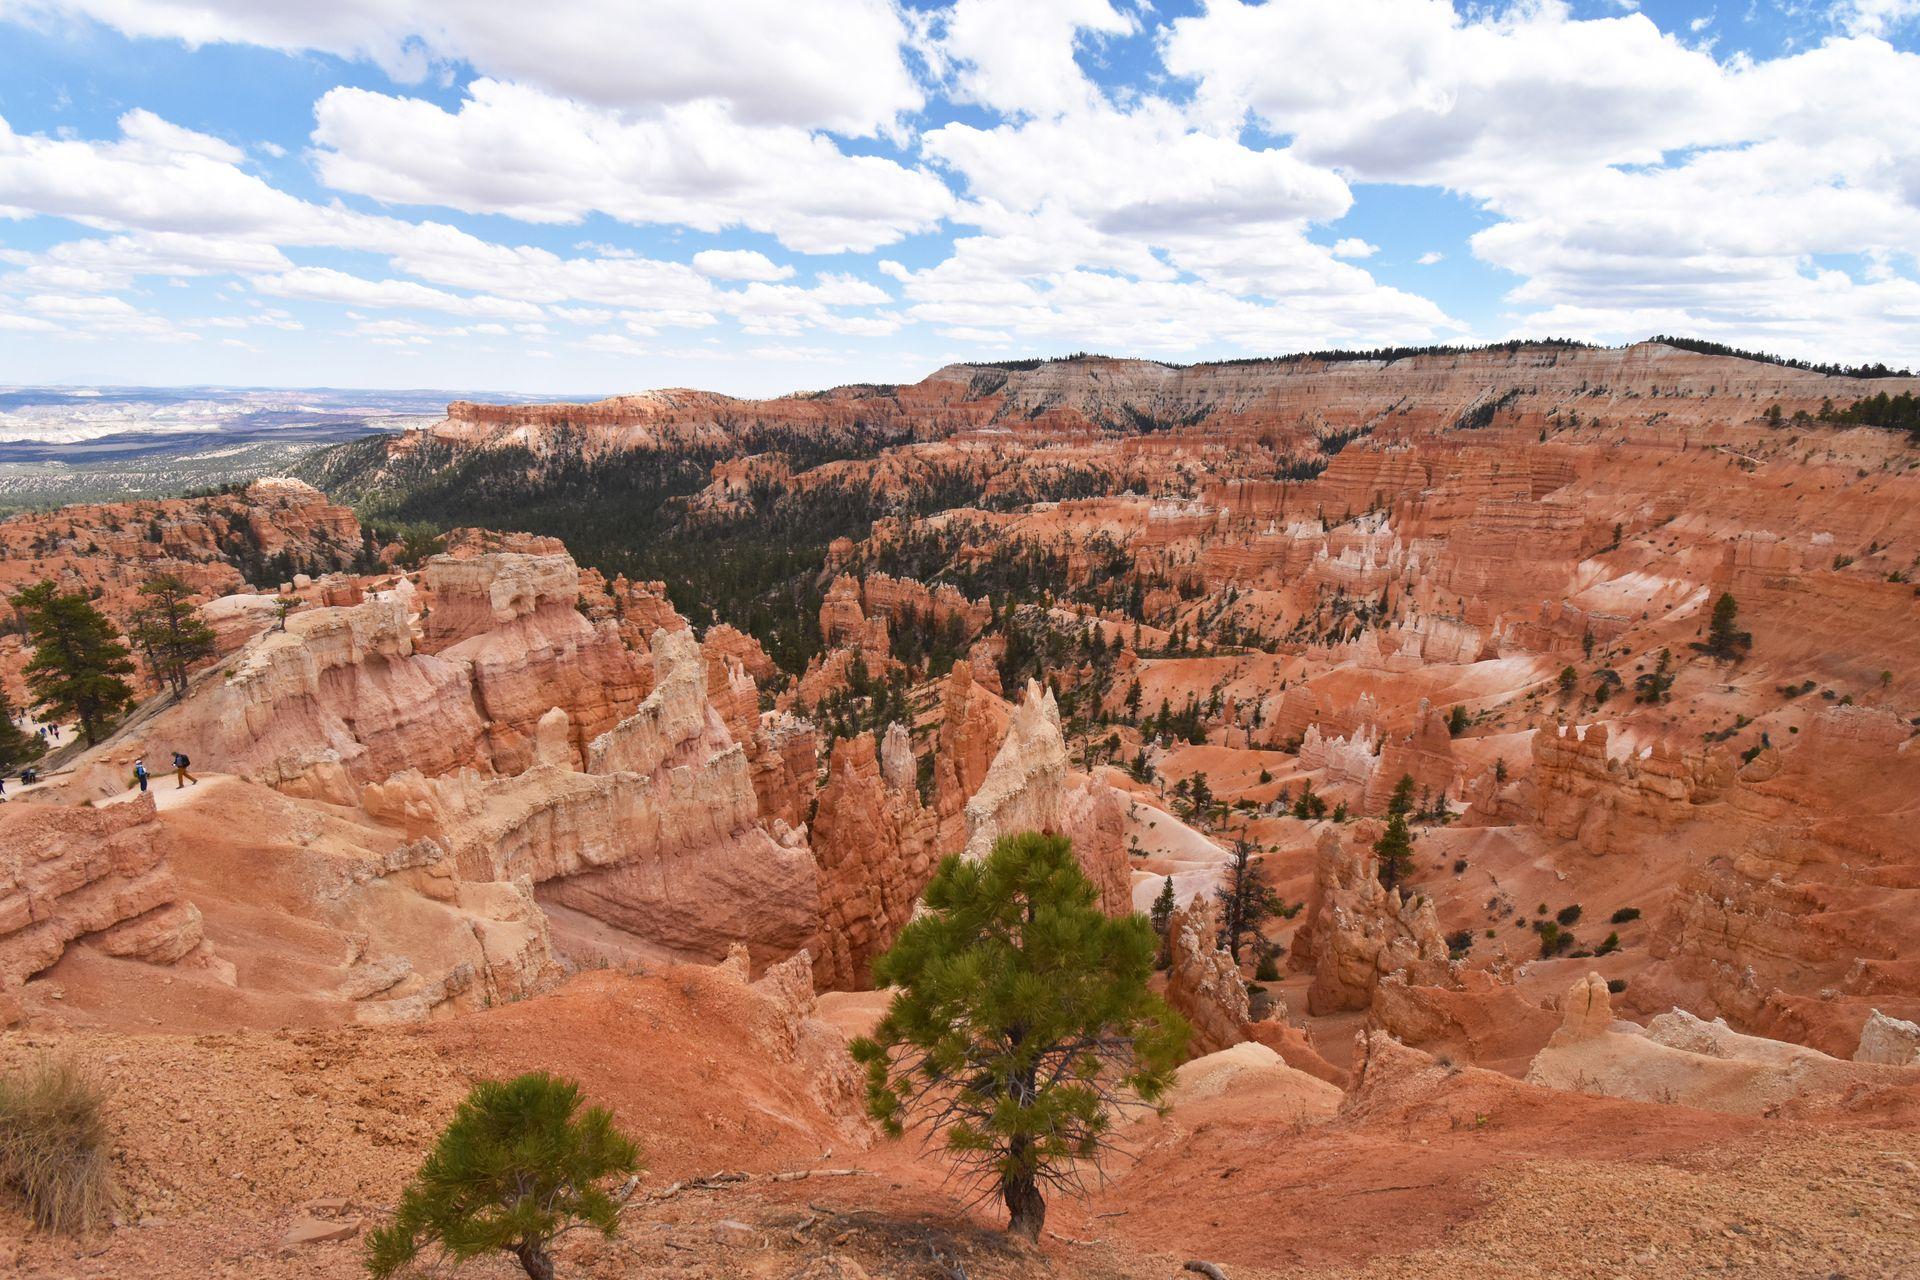 An expansive view of orange hoodoos from Sunrise Point.